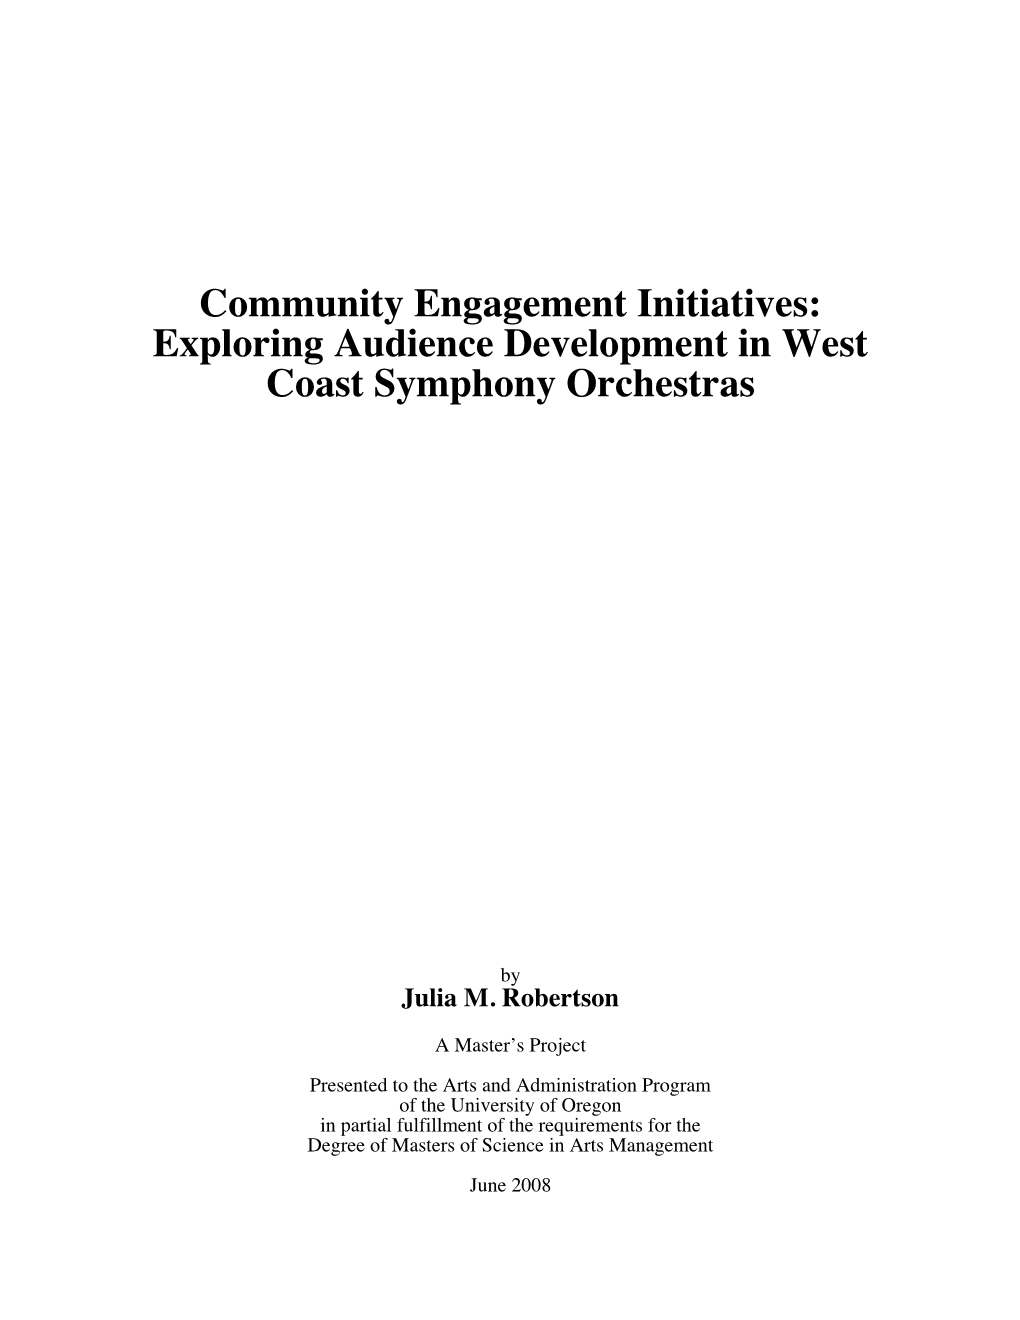 Community Engagement Initiatives: Exploring Audience Development in West Coast Symphony Orchestras